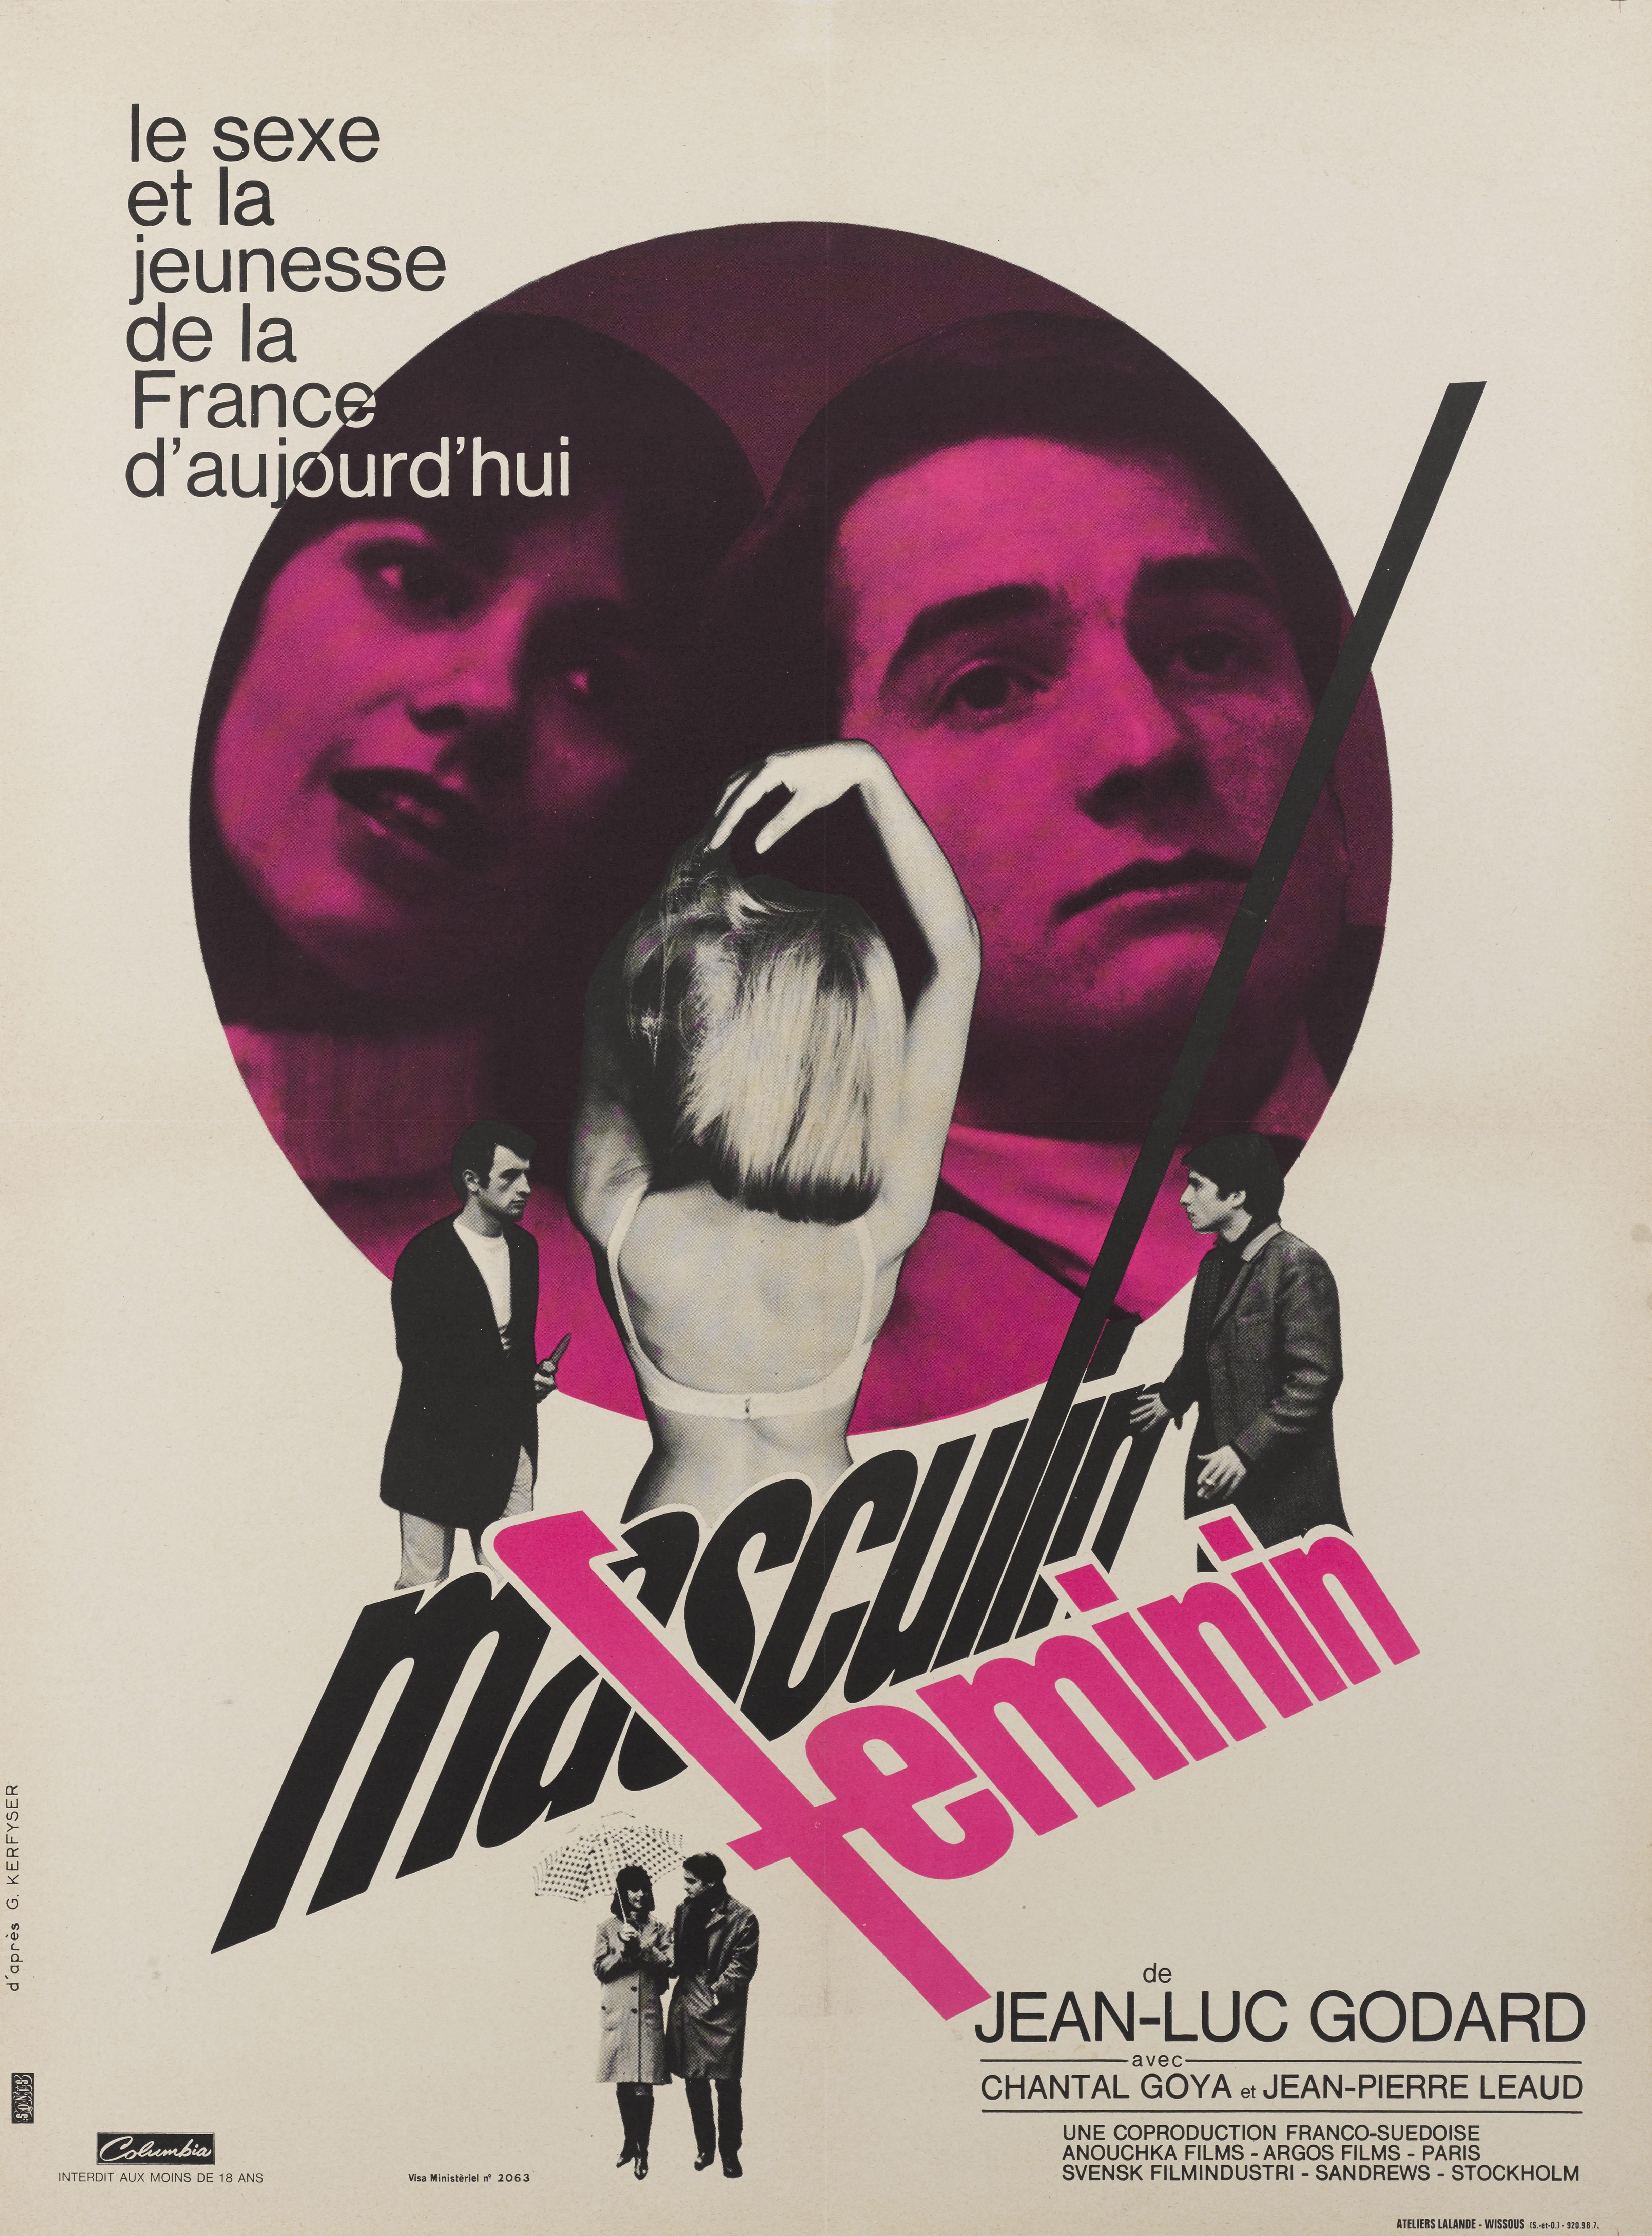 Original French film poster from Jean-Luc Godard's 1966 French New Wave film,
starring Jean-Pierre Léaud, Chantal Goya, and Marlène Jobert.
This poster is linen backed and would be shiped rolled in a strong tube.